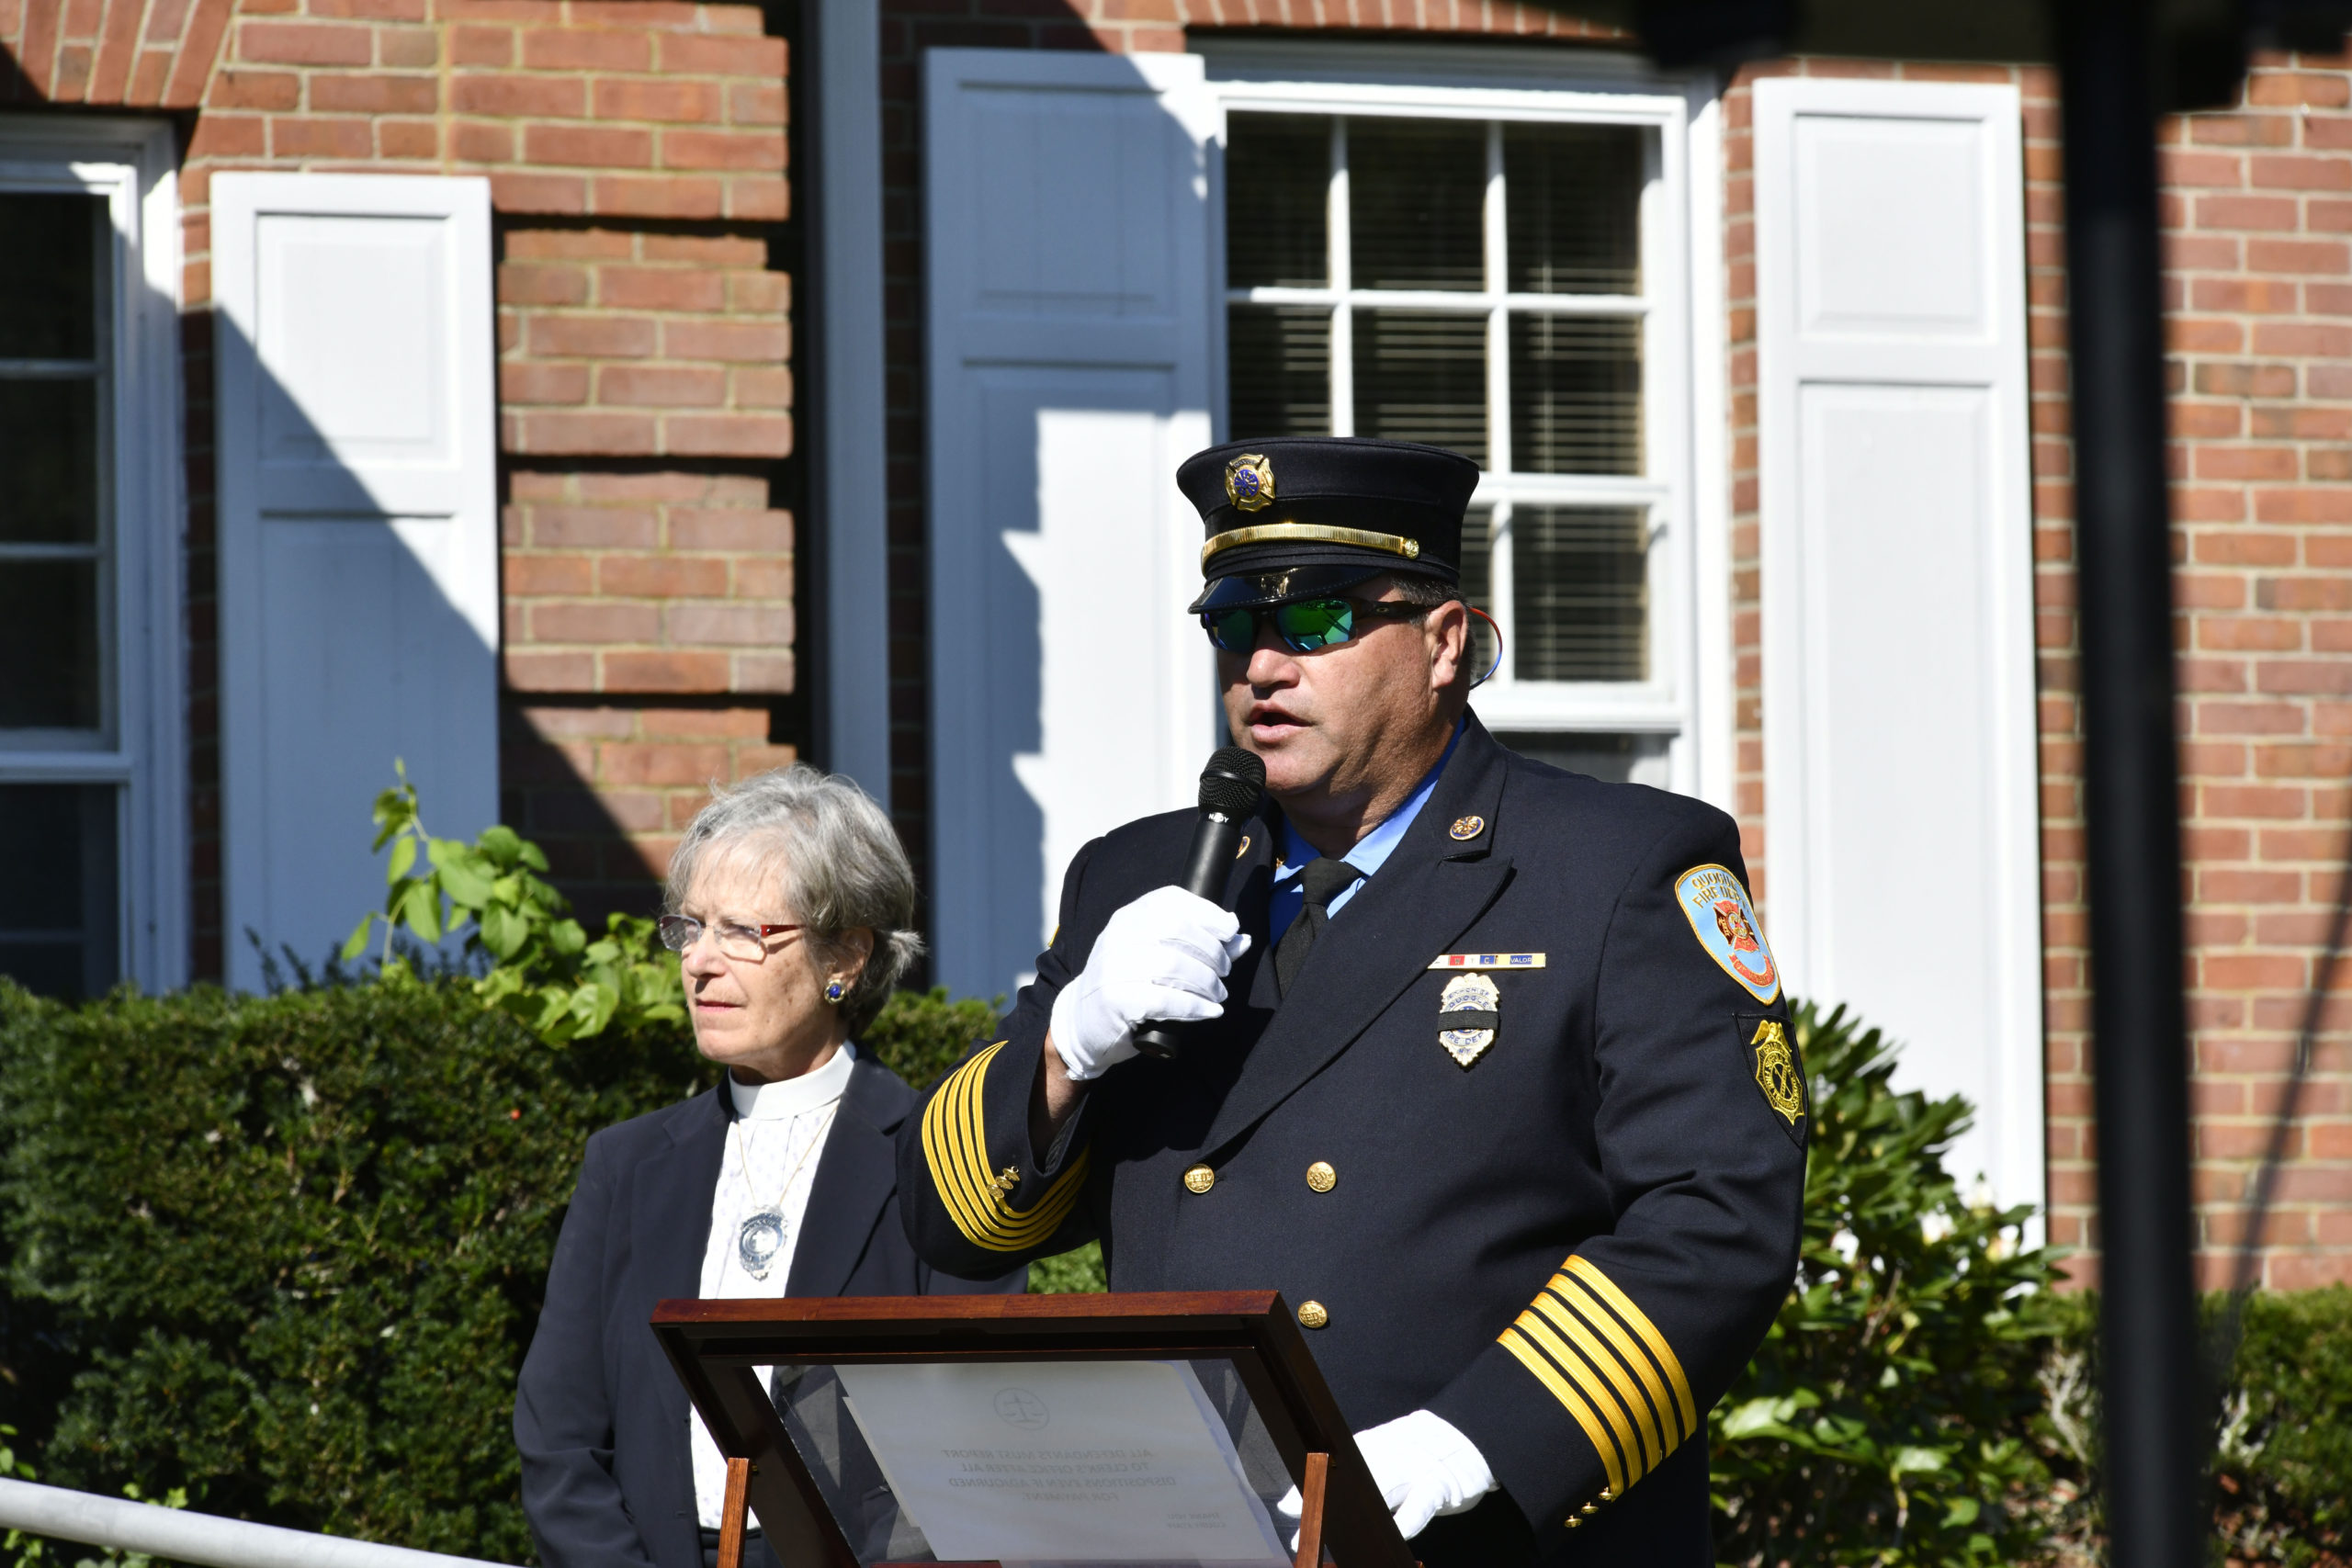 Quogue Fire Department Ex-Chief Chris Osborne welcomes the crowd the memorial rededication ceremony on Saturday.